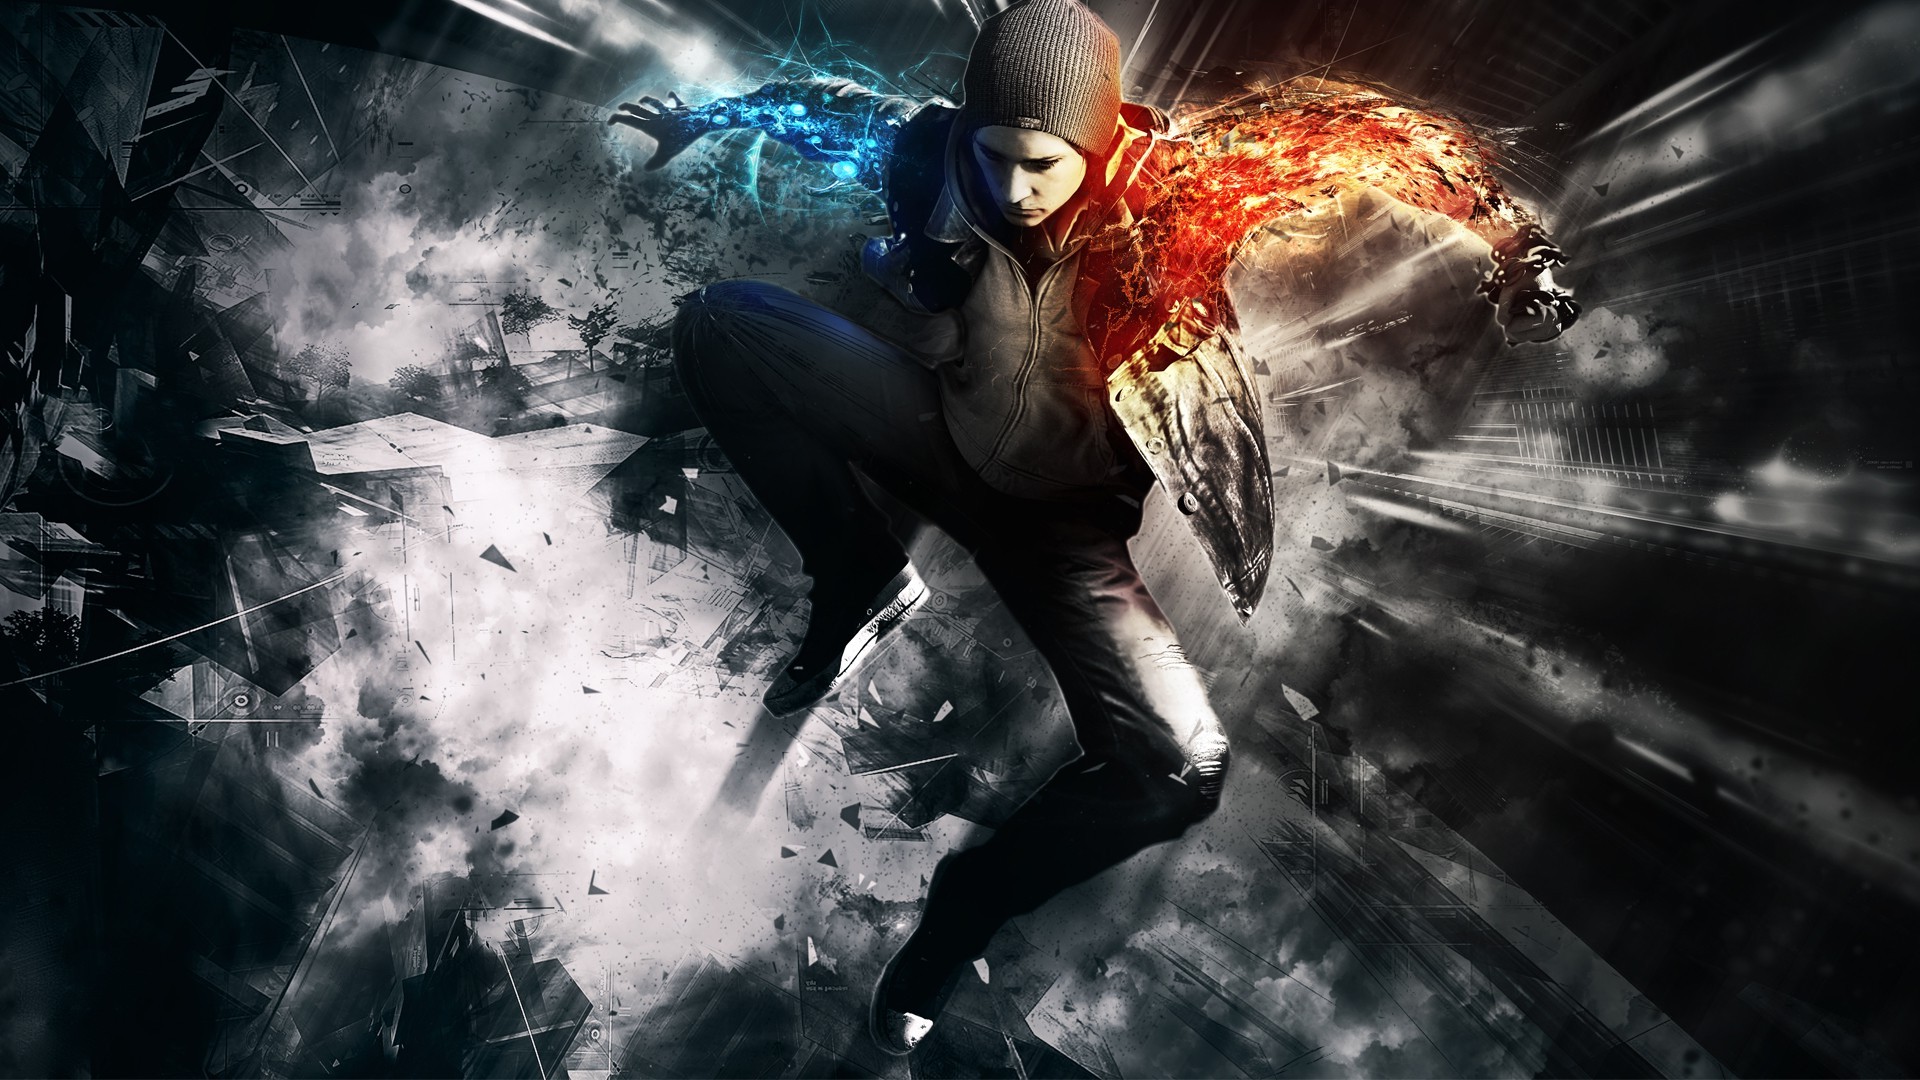 download free infamous 2 game